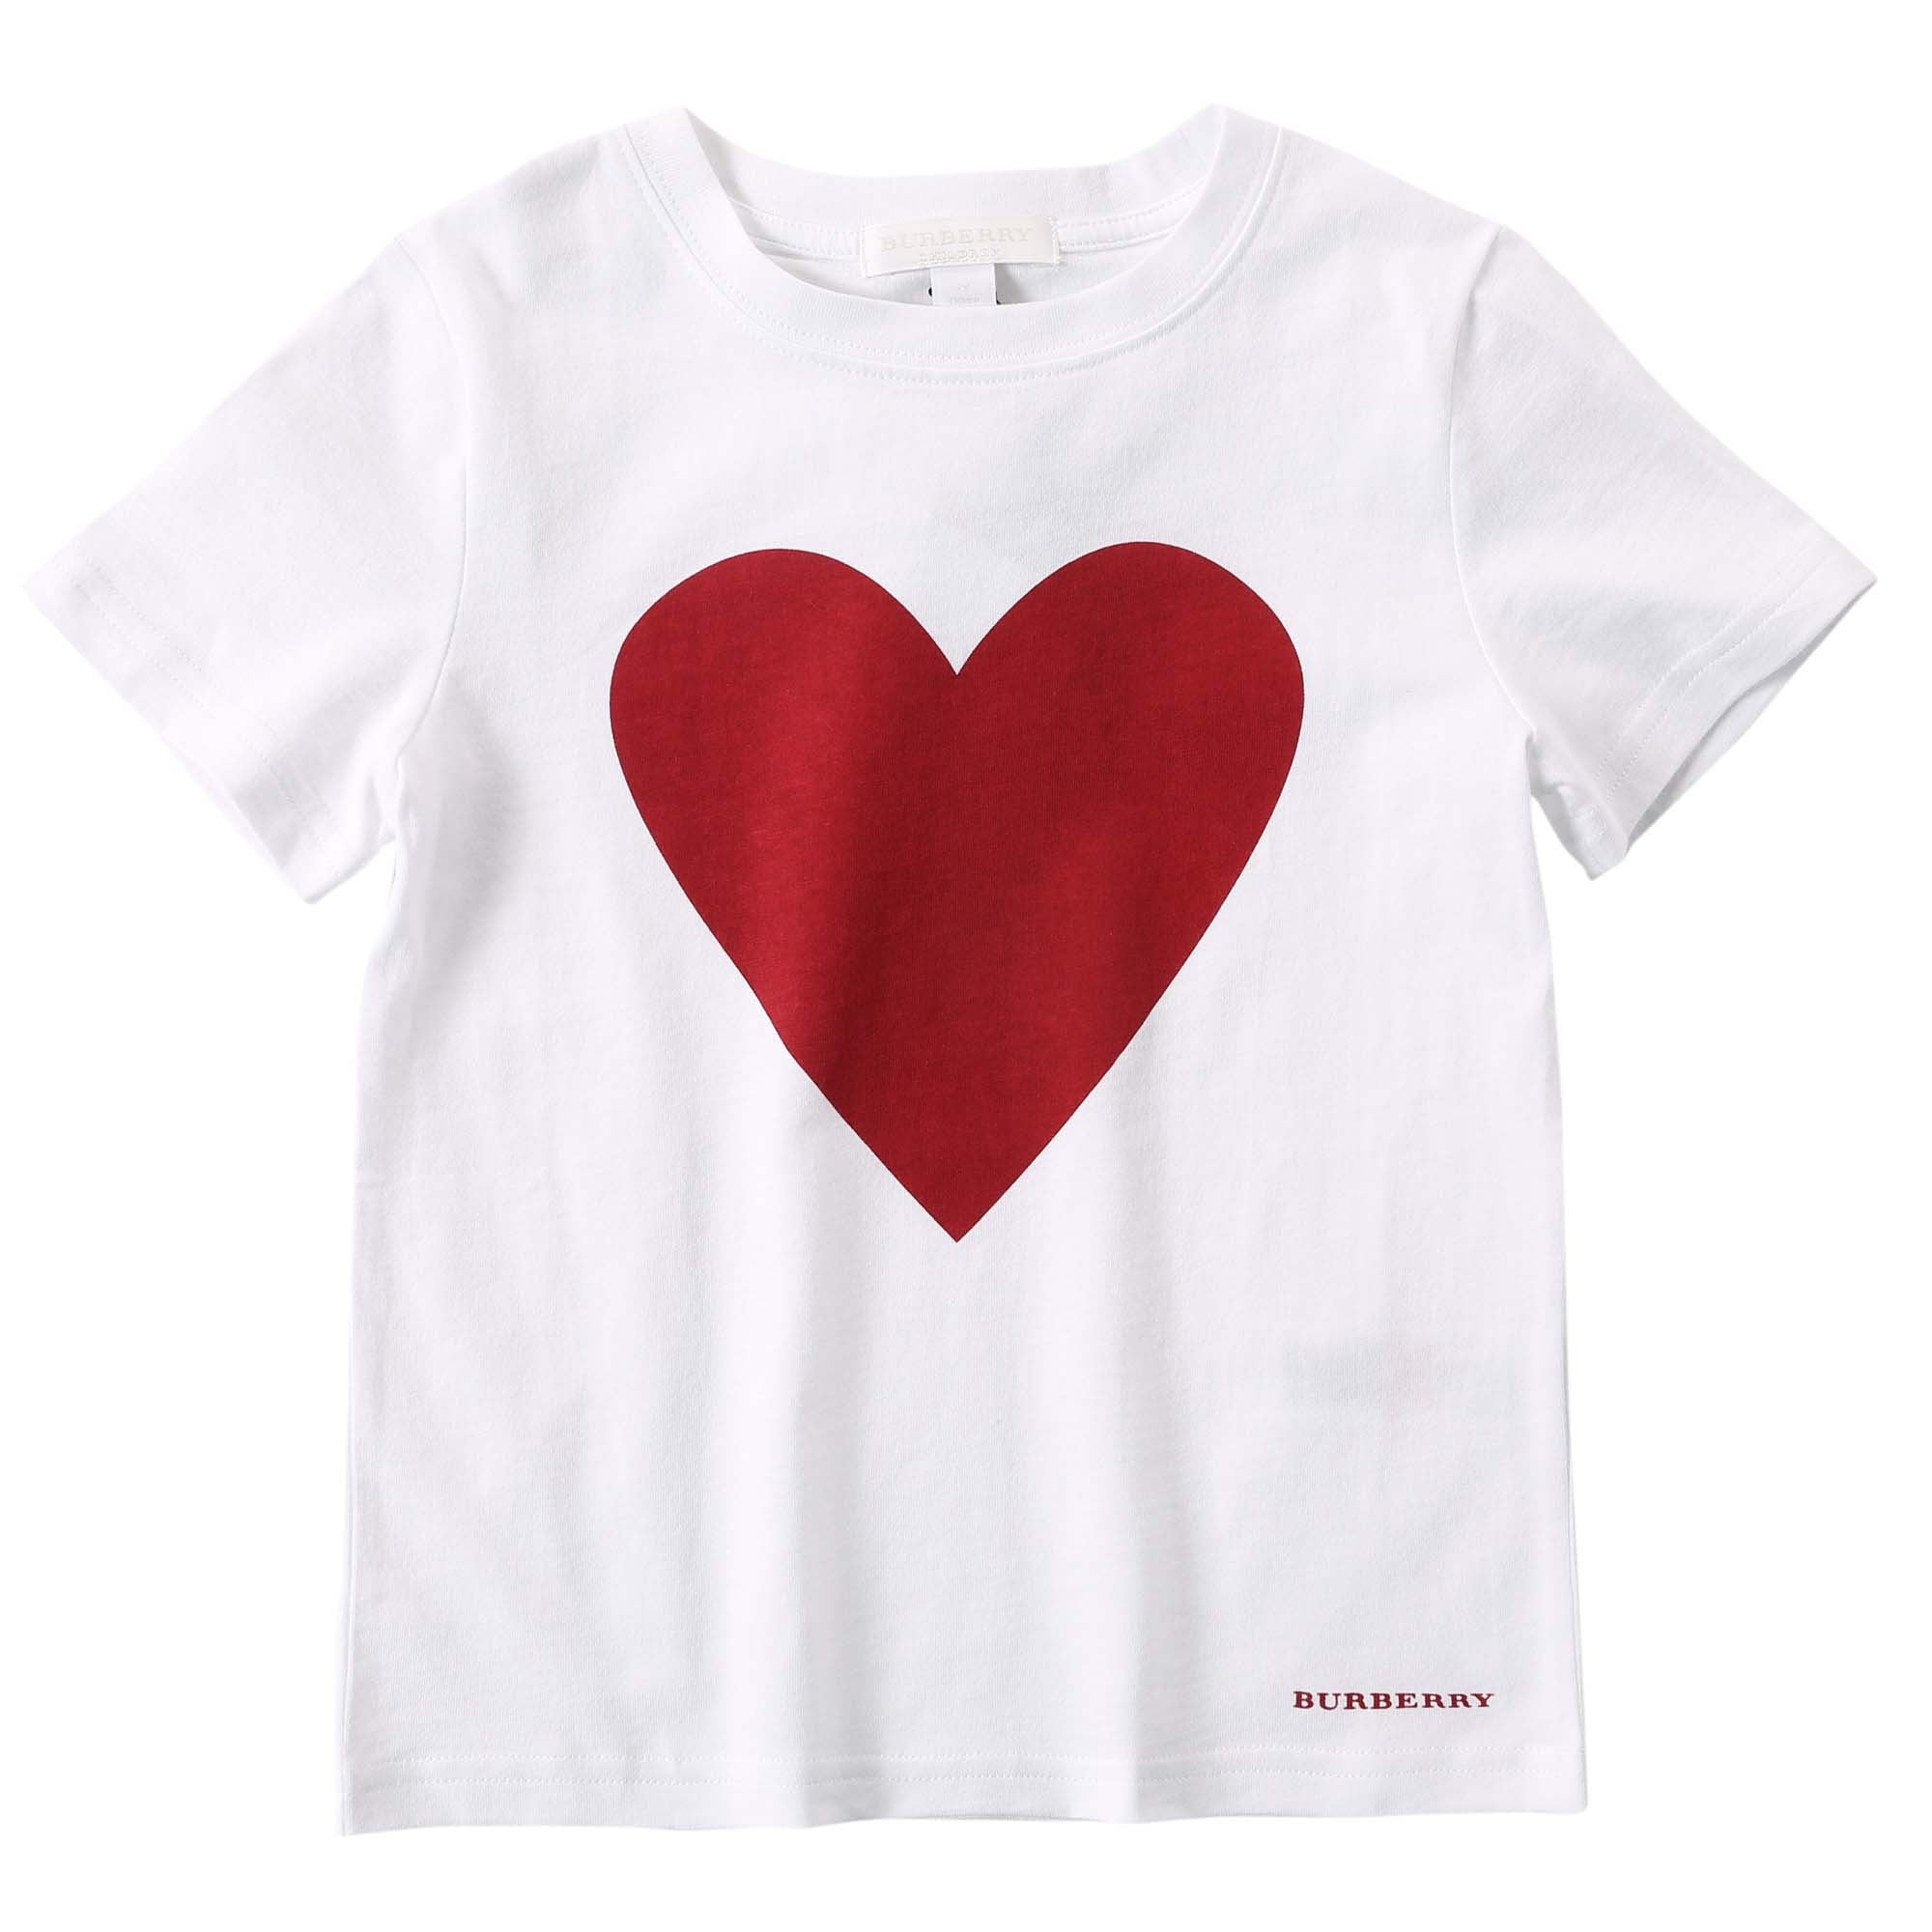 Girls White Cotton T-Shirt With Red Heart Trims - CÉMAROSE | Children's Fashion Store - 1